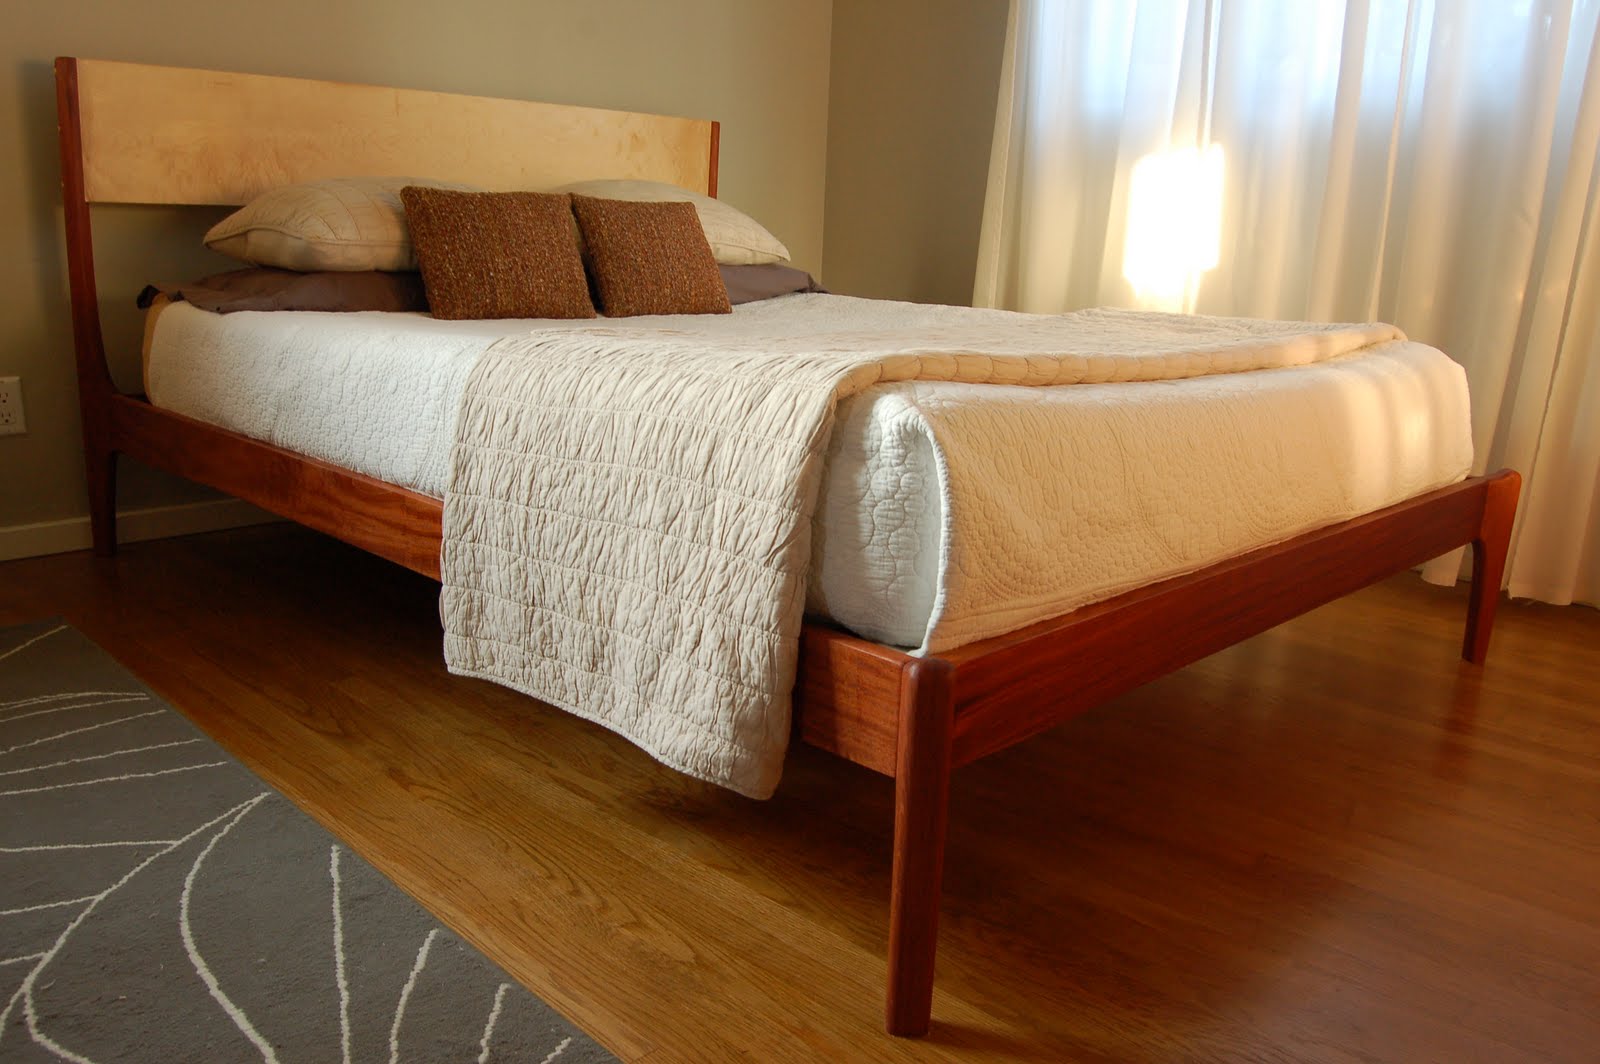 Furniture by Pete: Danish Modern Style Bed